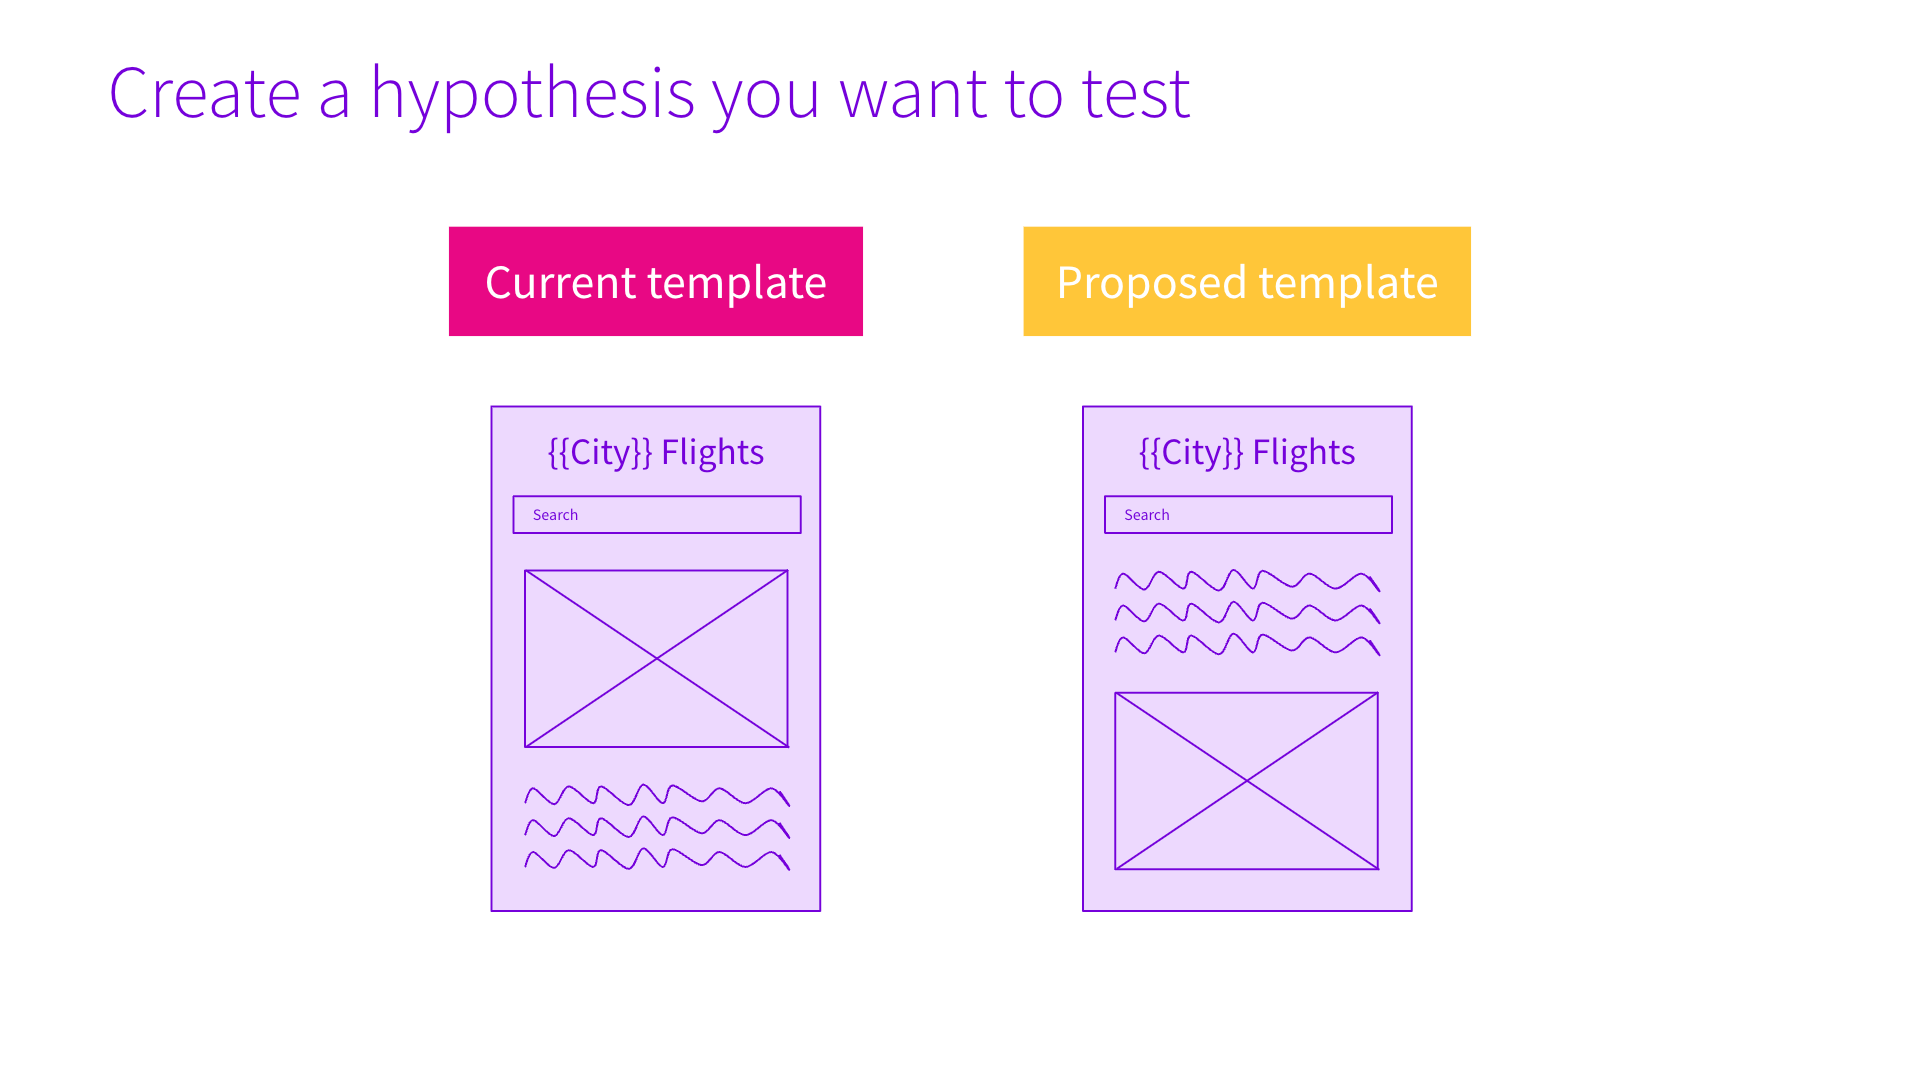 Create a hypothesis you want to test